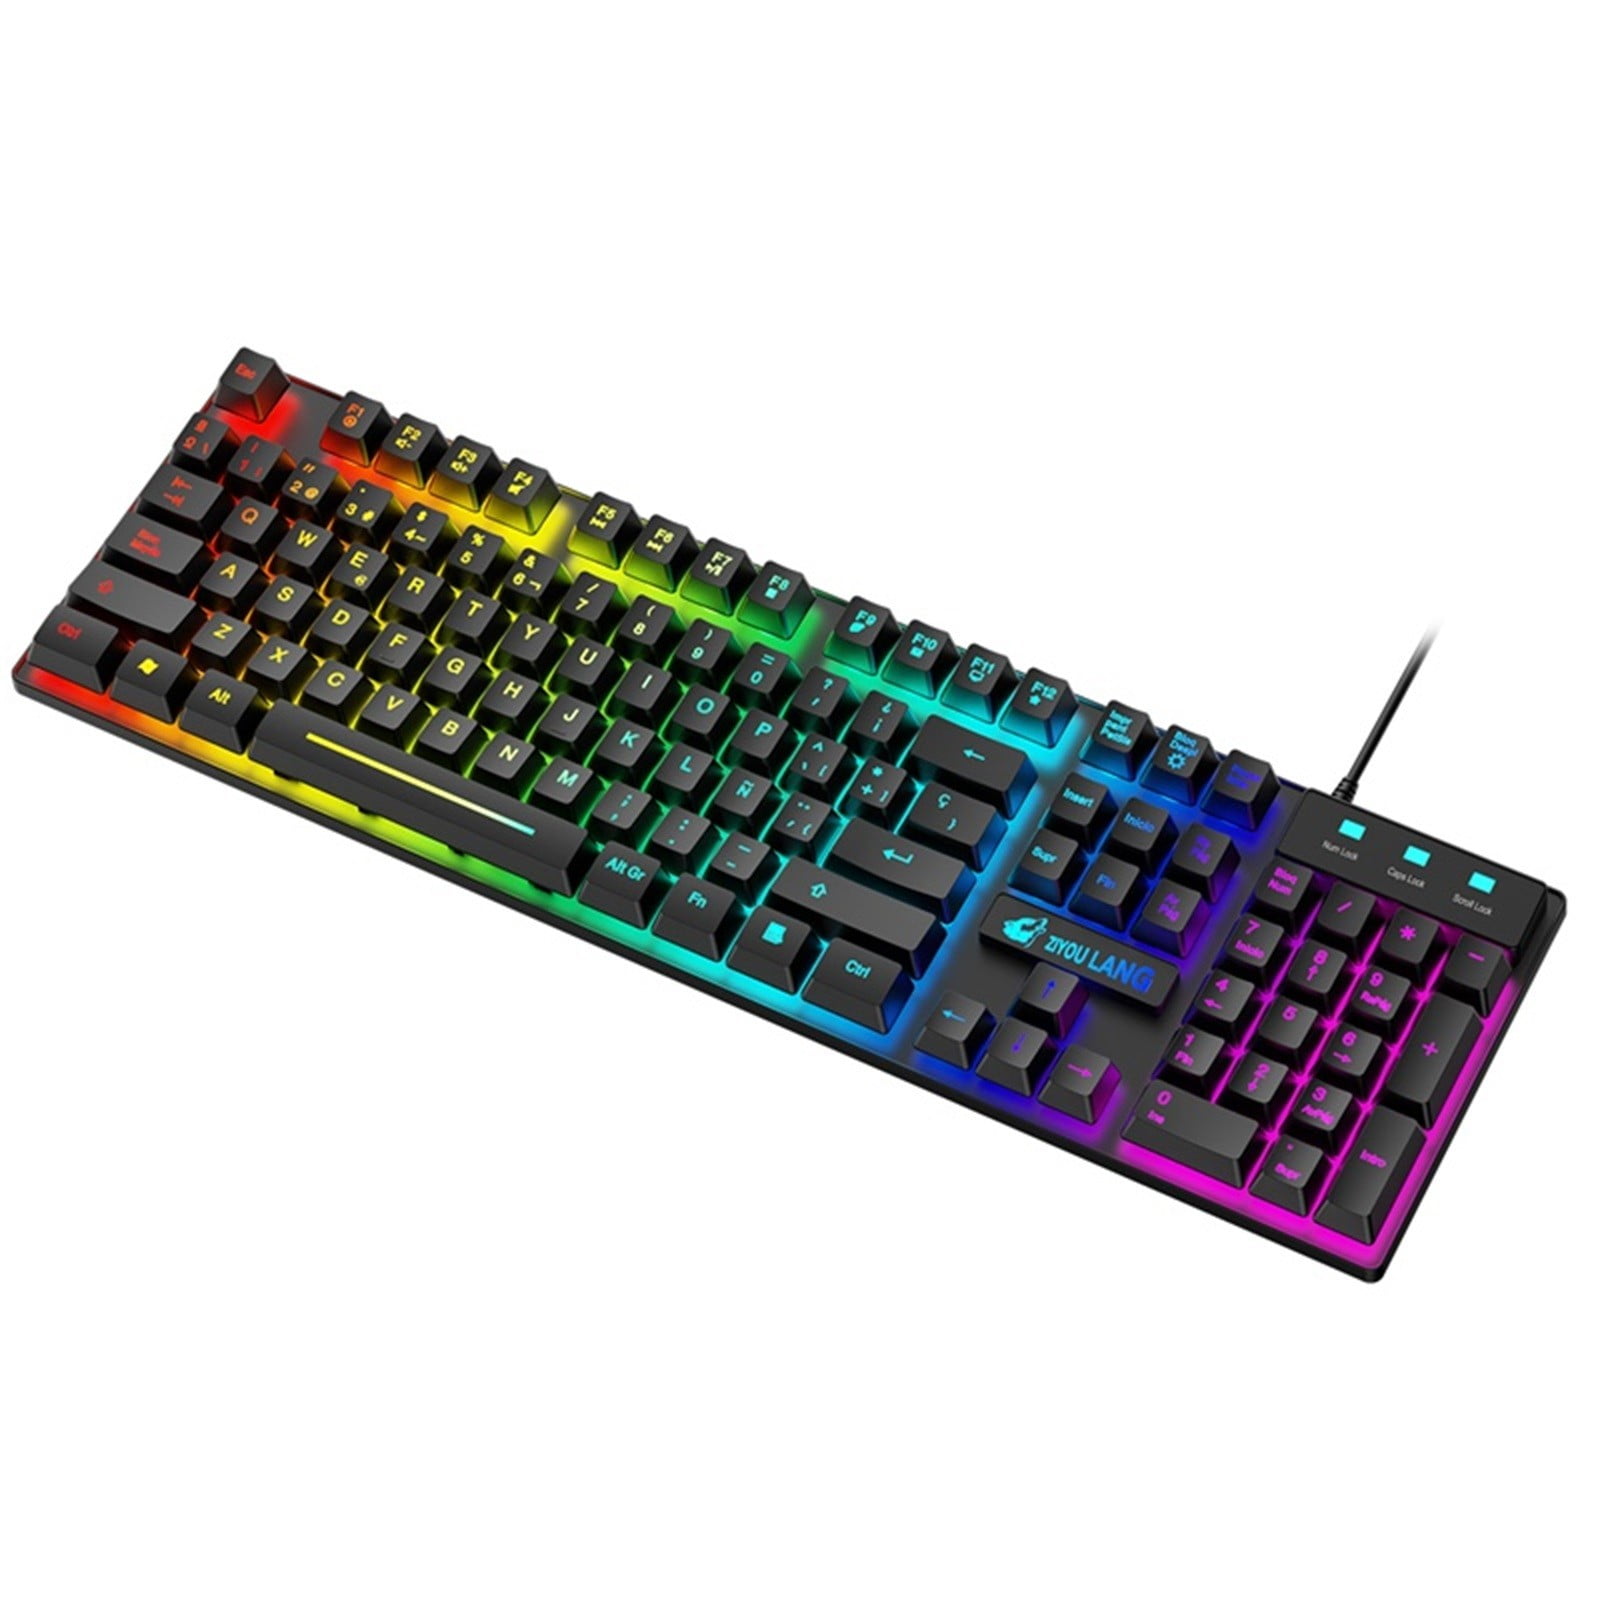 Bowake T13 RGB Spanish Gaming Keyboard And Mouse With 104-key Backlit  QWERTY Keyboard